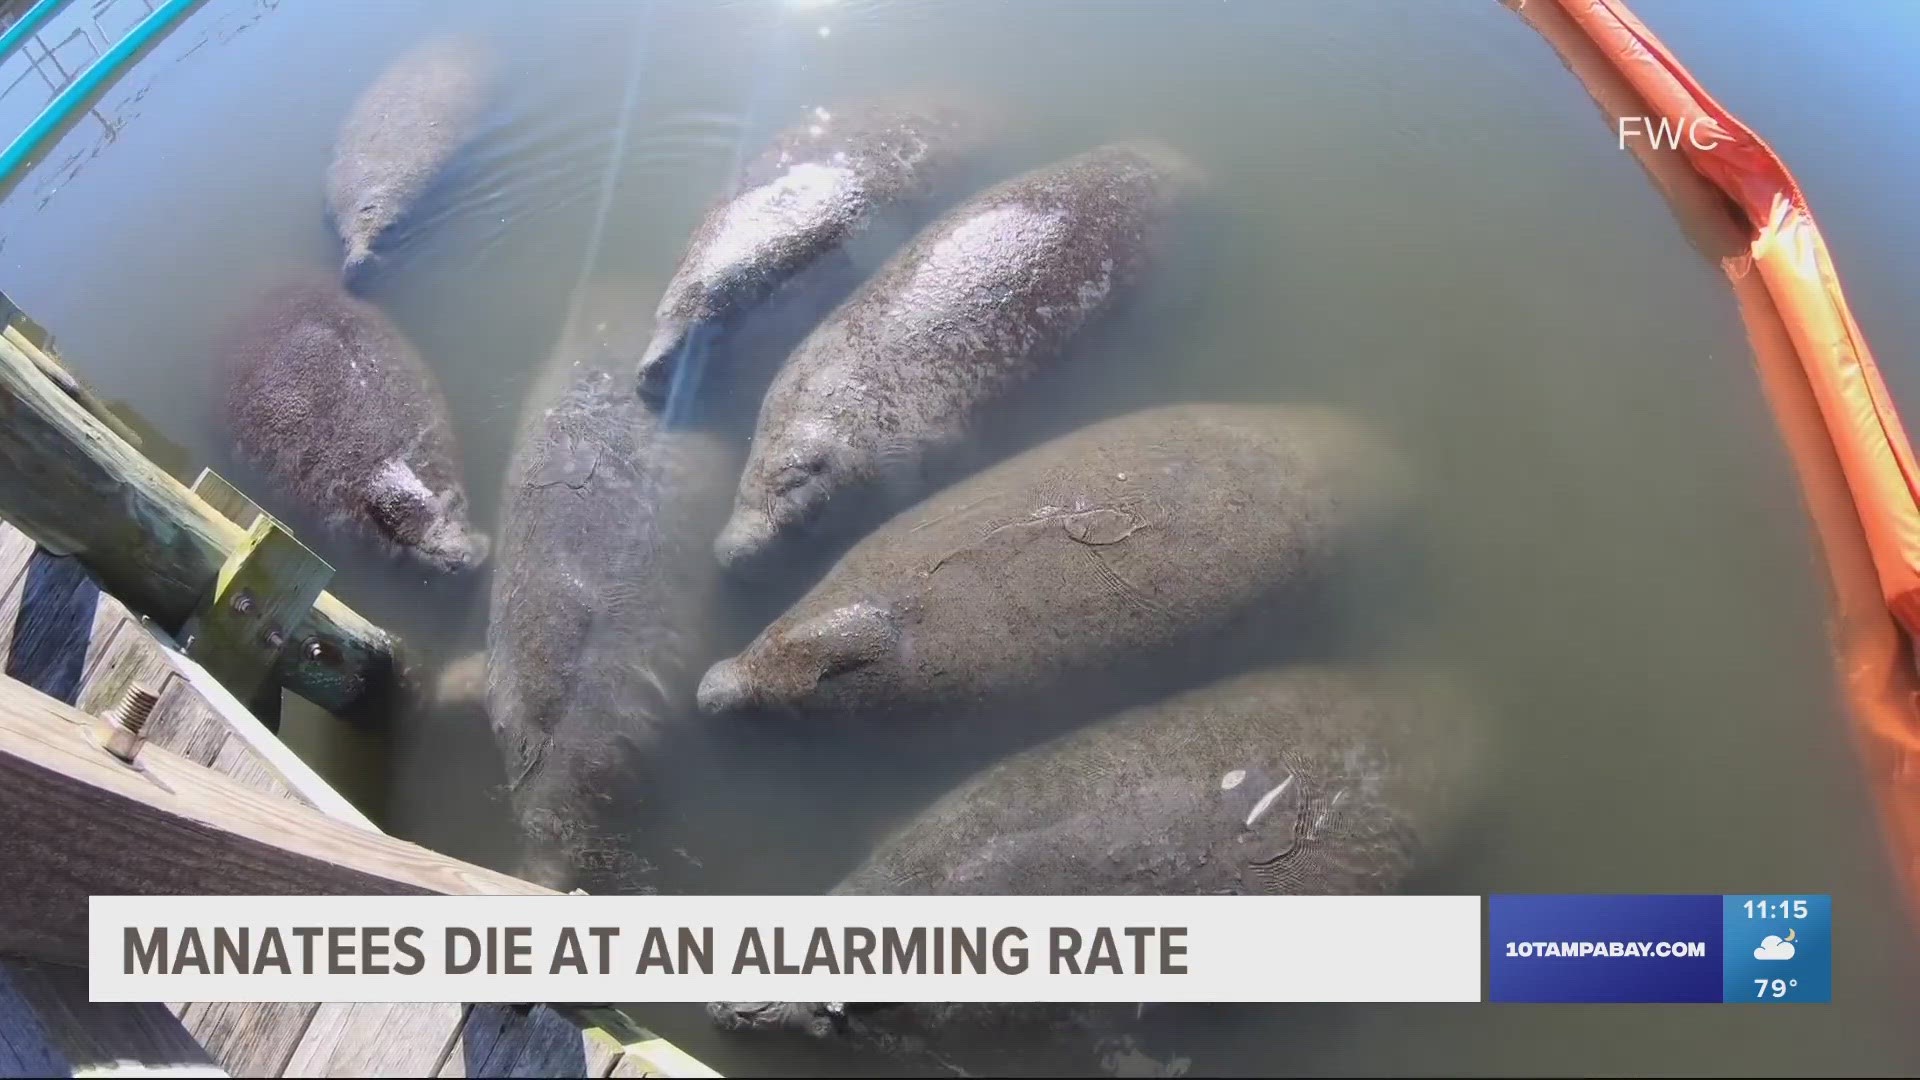 Water quality leaders are discussing ways to prevent manatees from dying. Right now statistics show manatees are dying at an unusual rate.